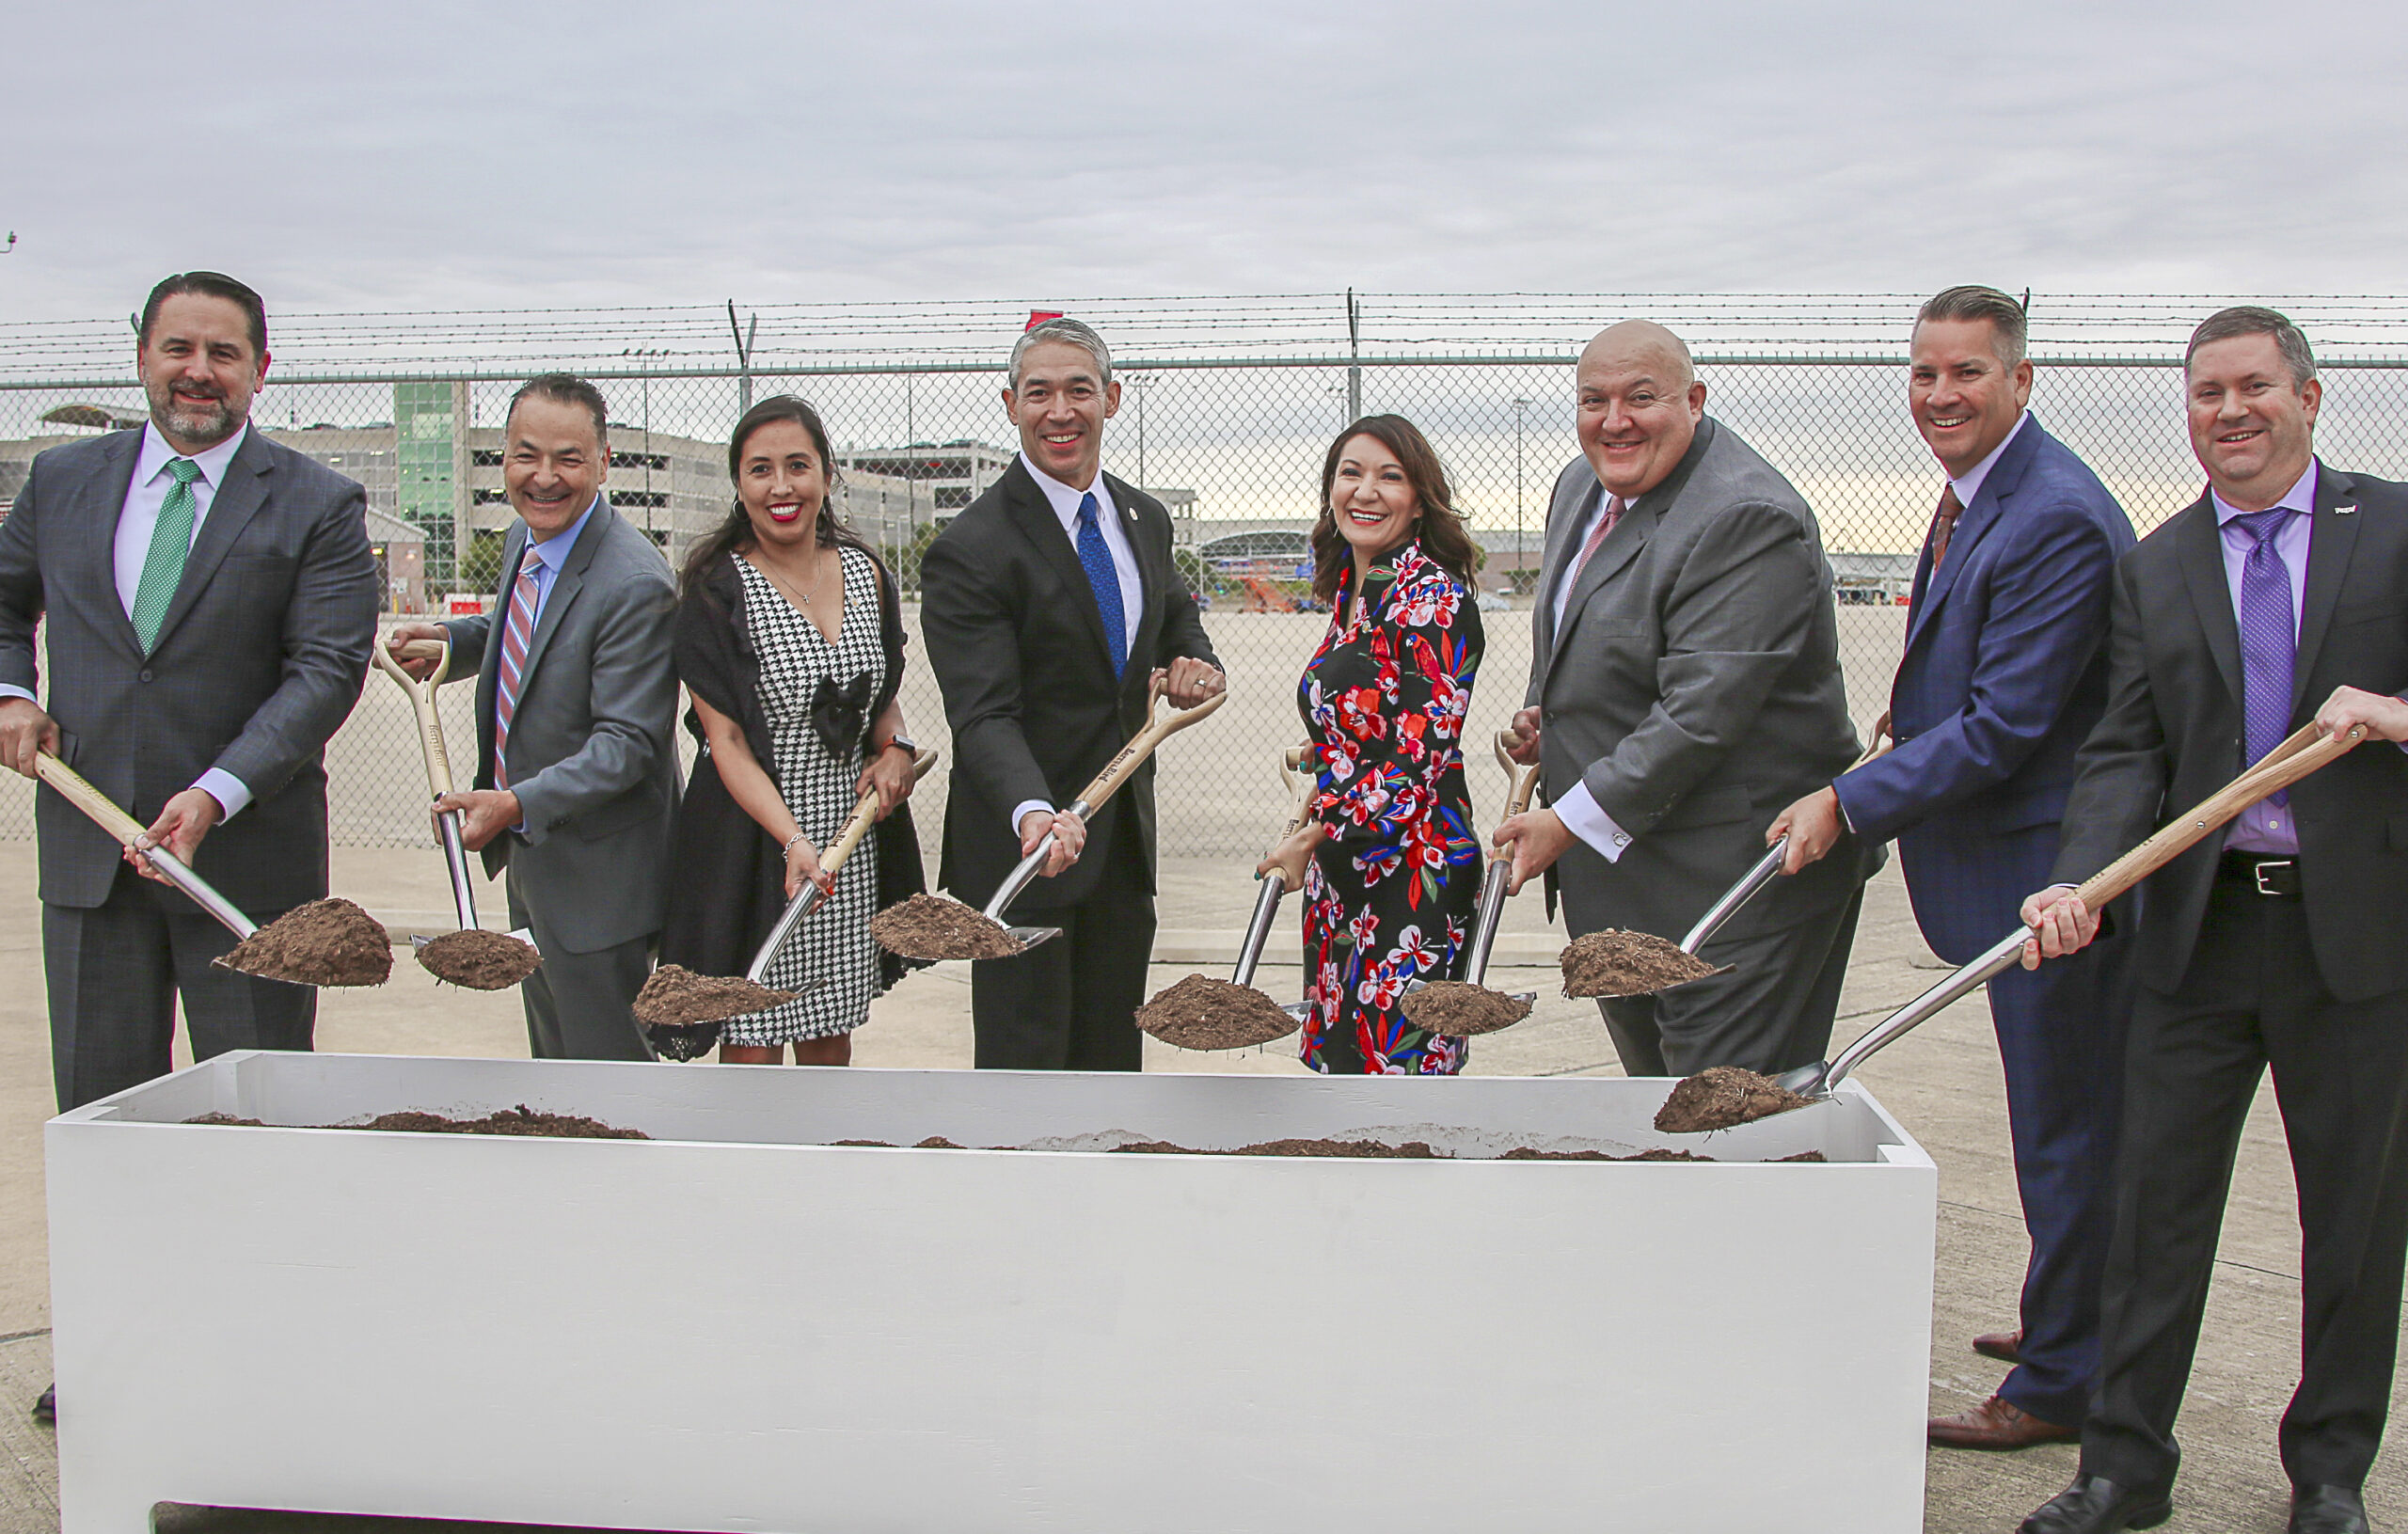 Groundbreaking at SAT's Ground Load Facility